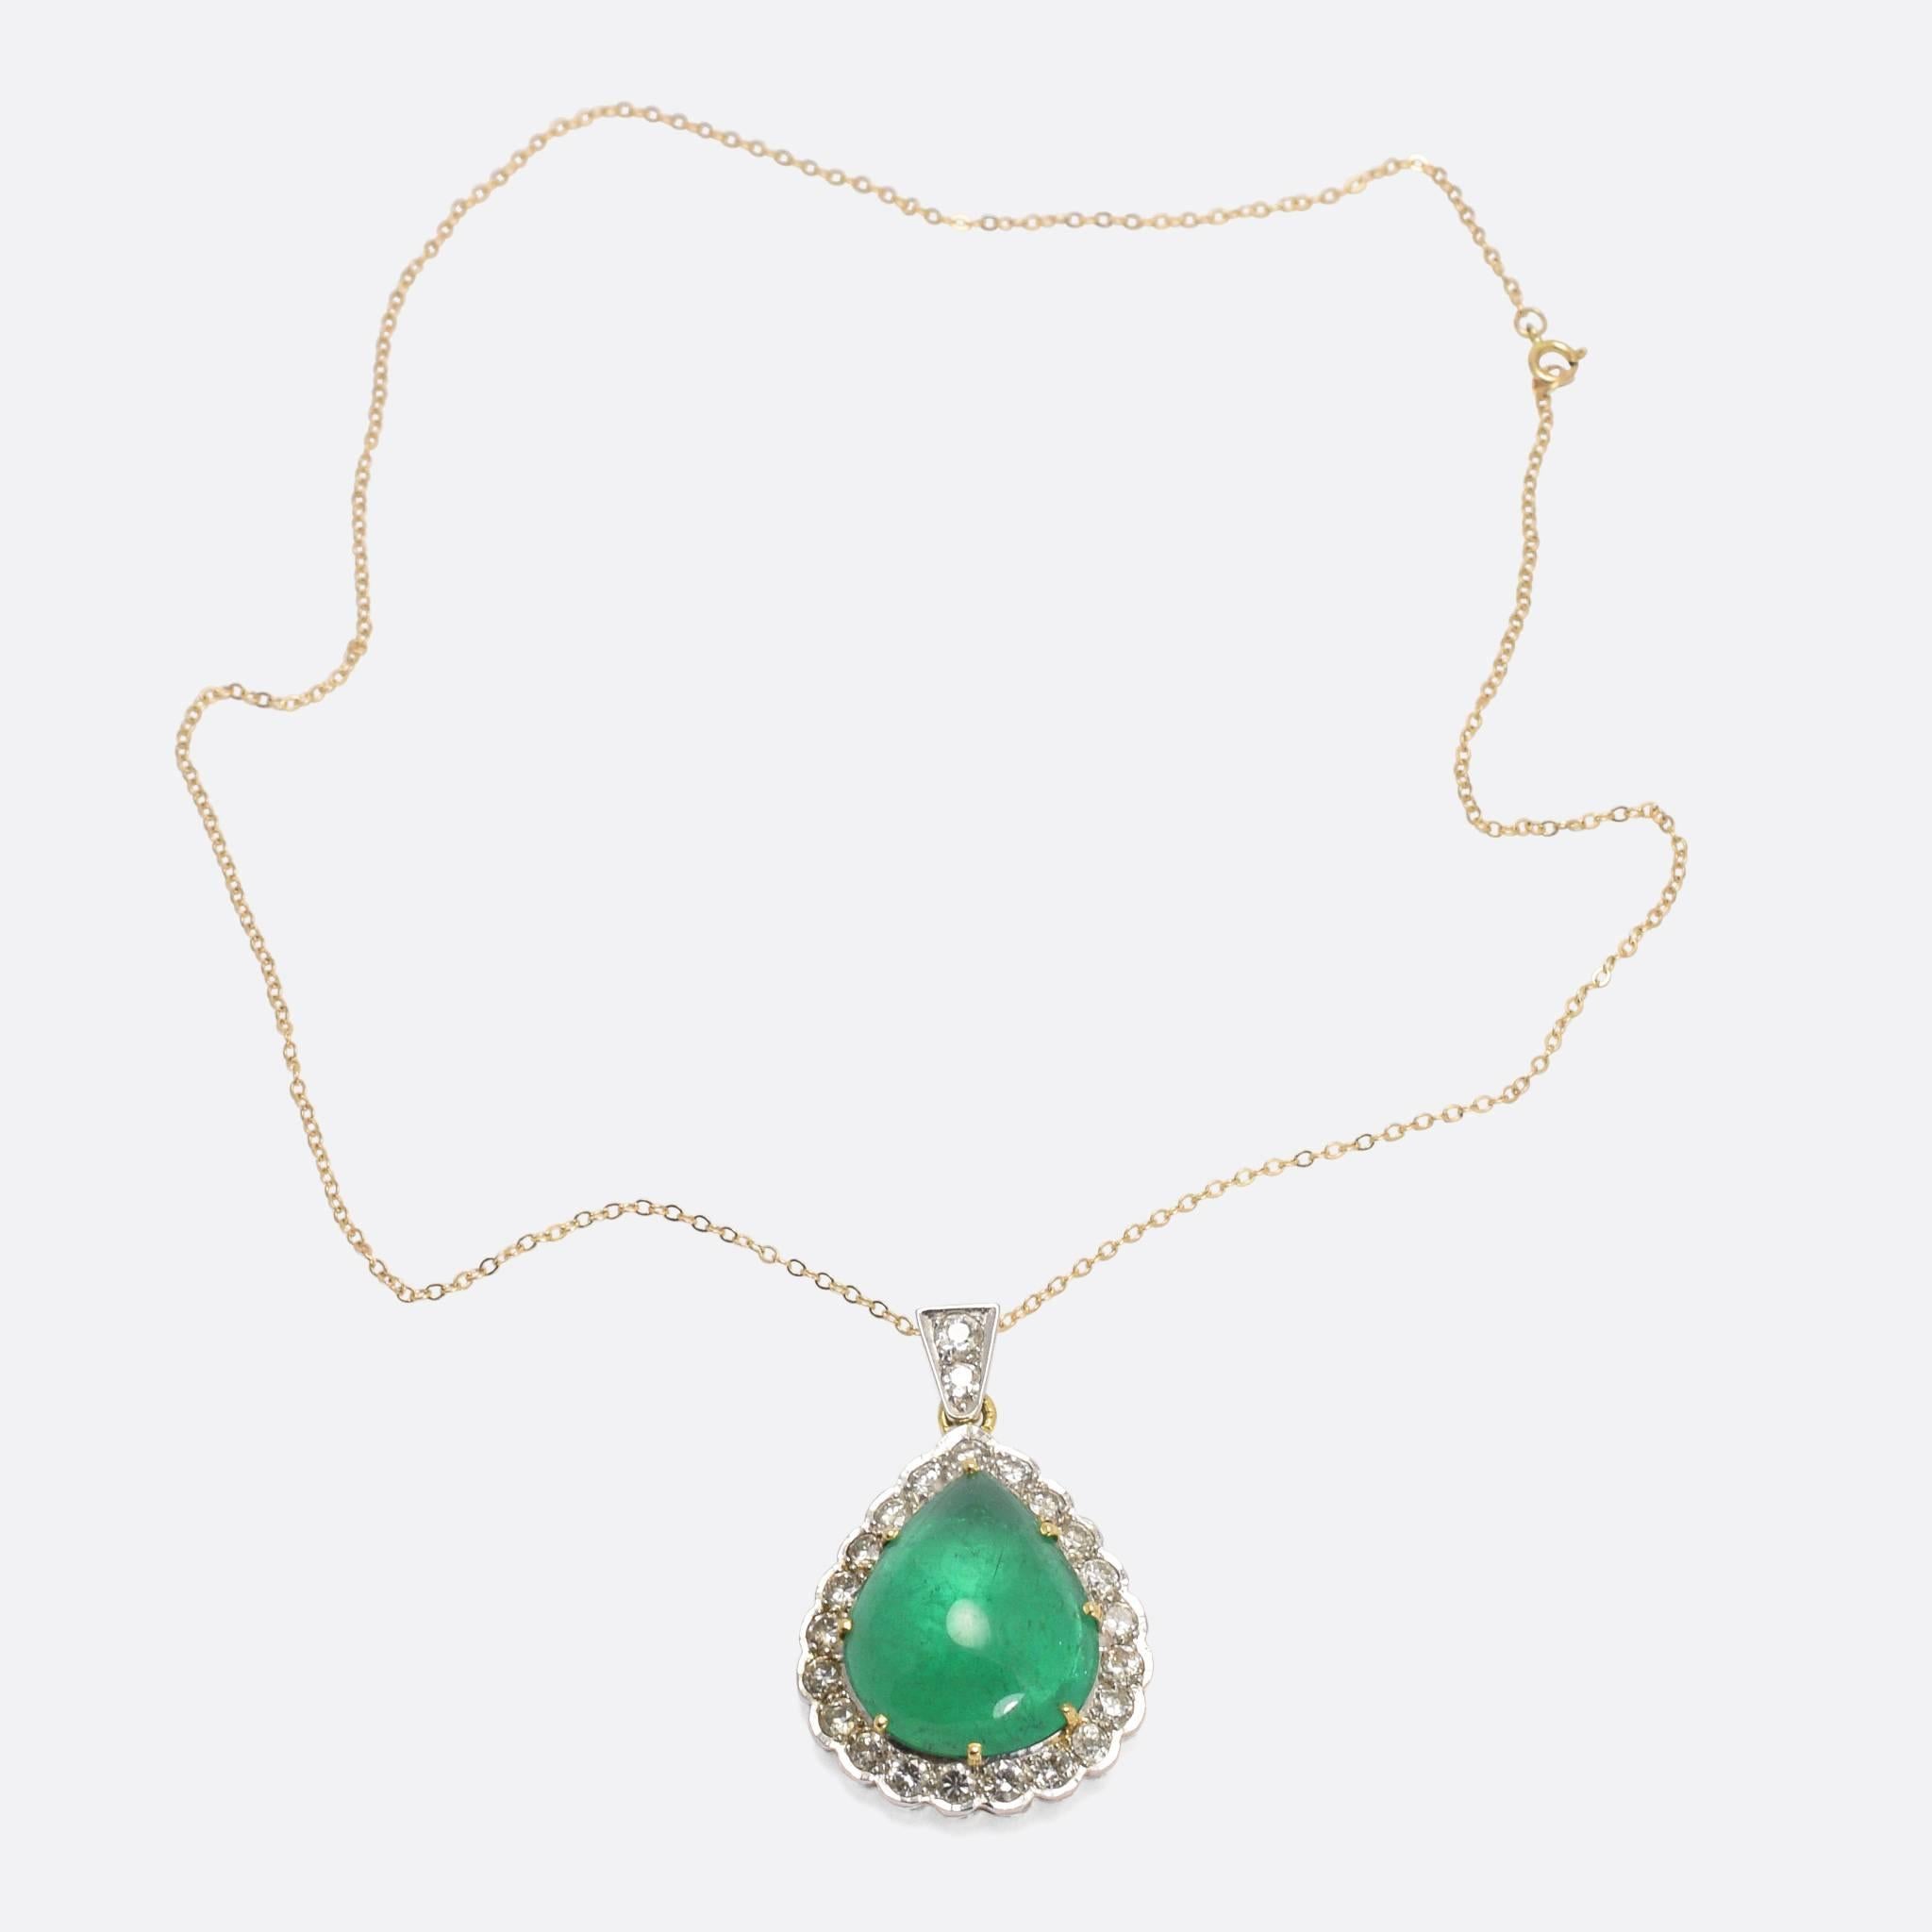 A superb vintage teardrop pendant, set with a stunning 22.5 carat emerald cabochon. The marvellous stone has a diamond halo surround (totalling 1.5ctw) and an original diamond set bail. With french marks for 18 karat gold, this exceptional piece